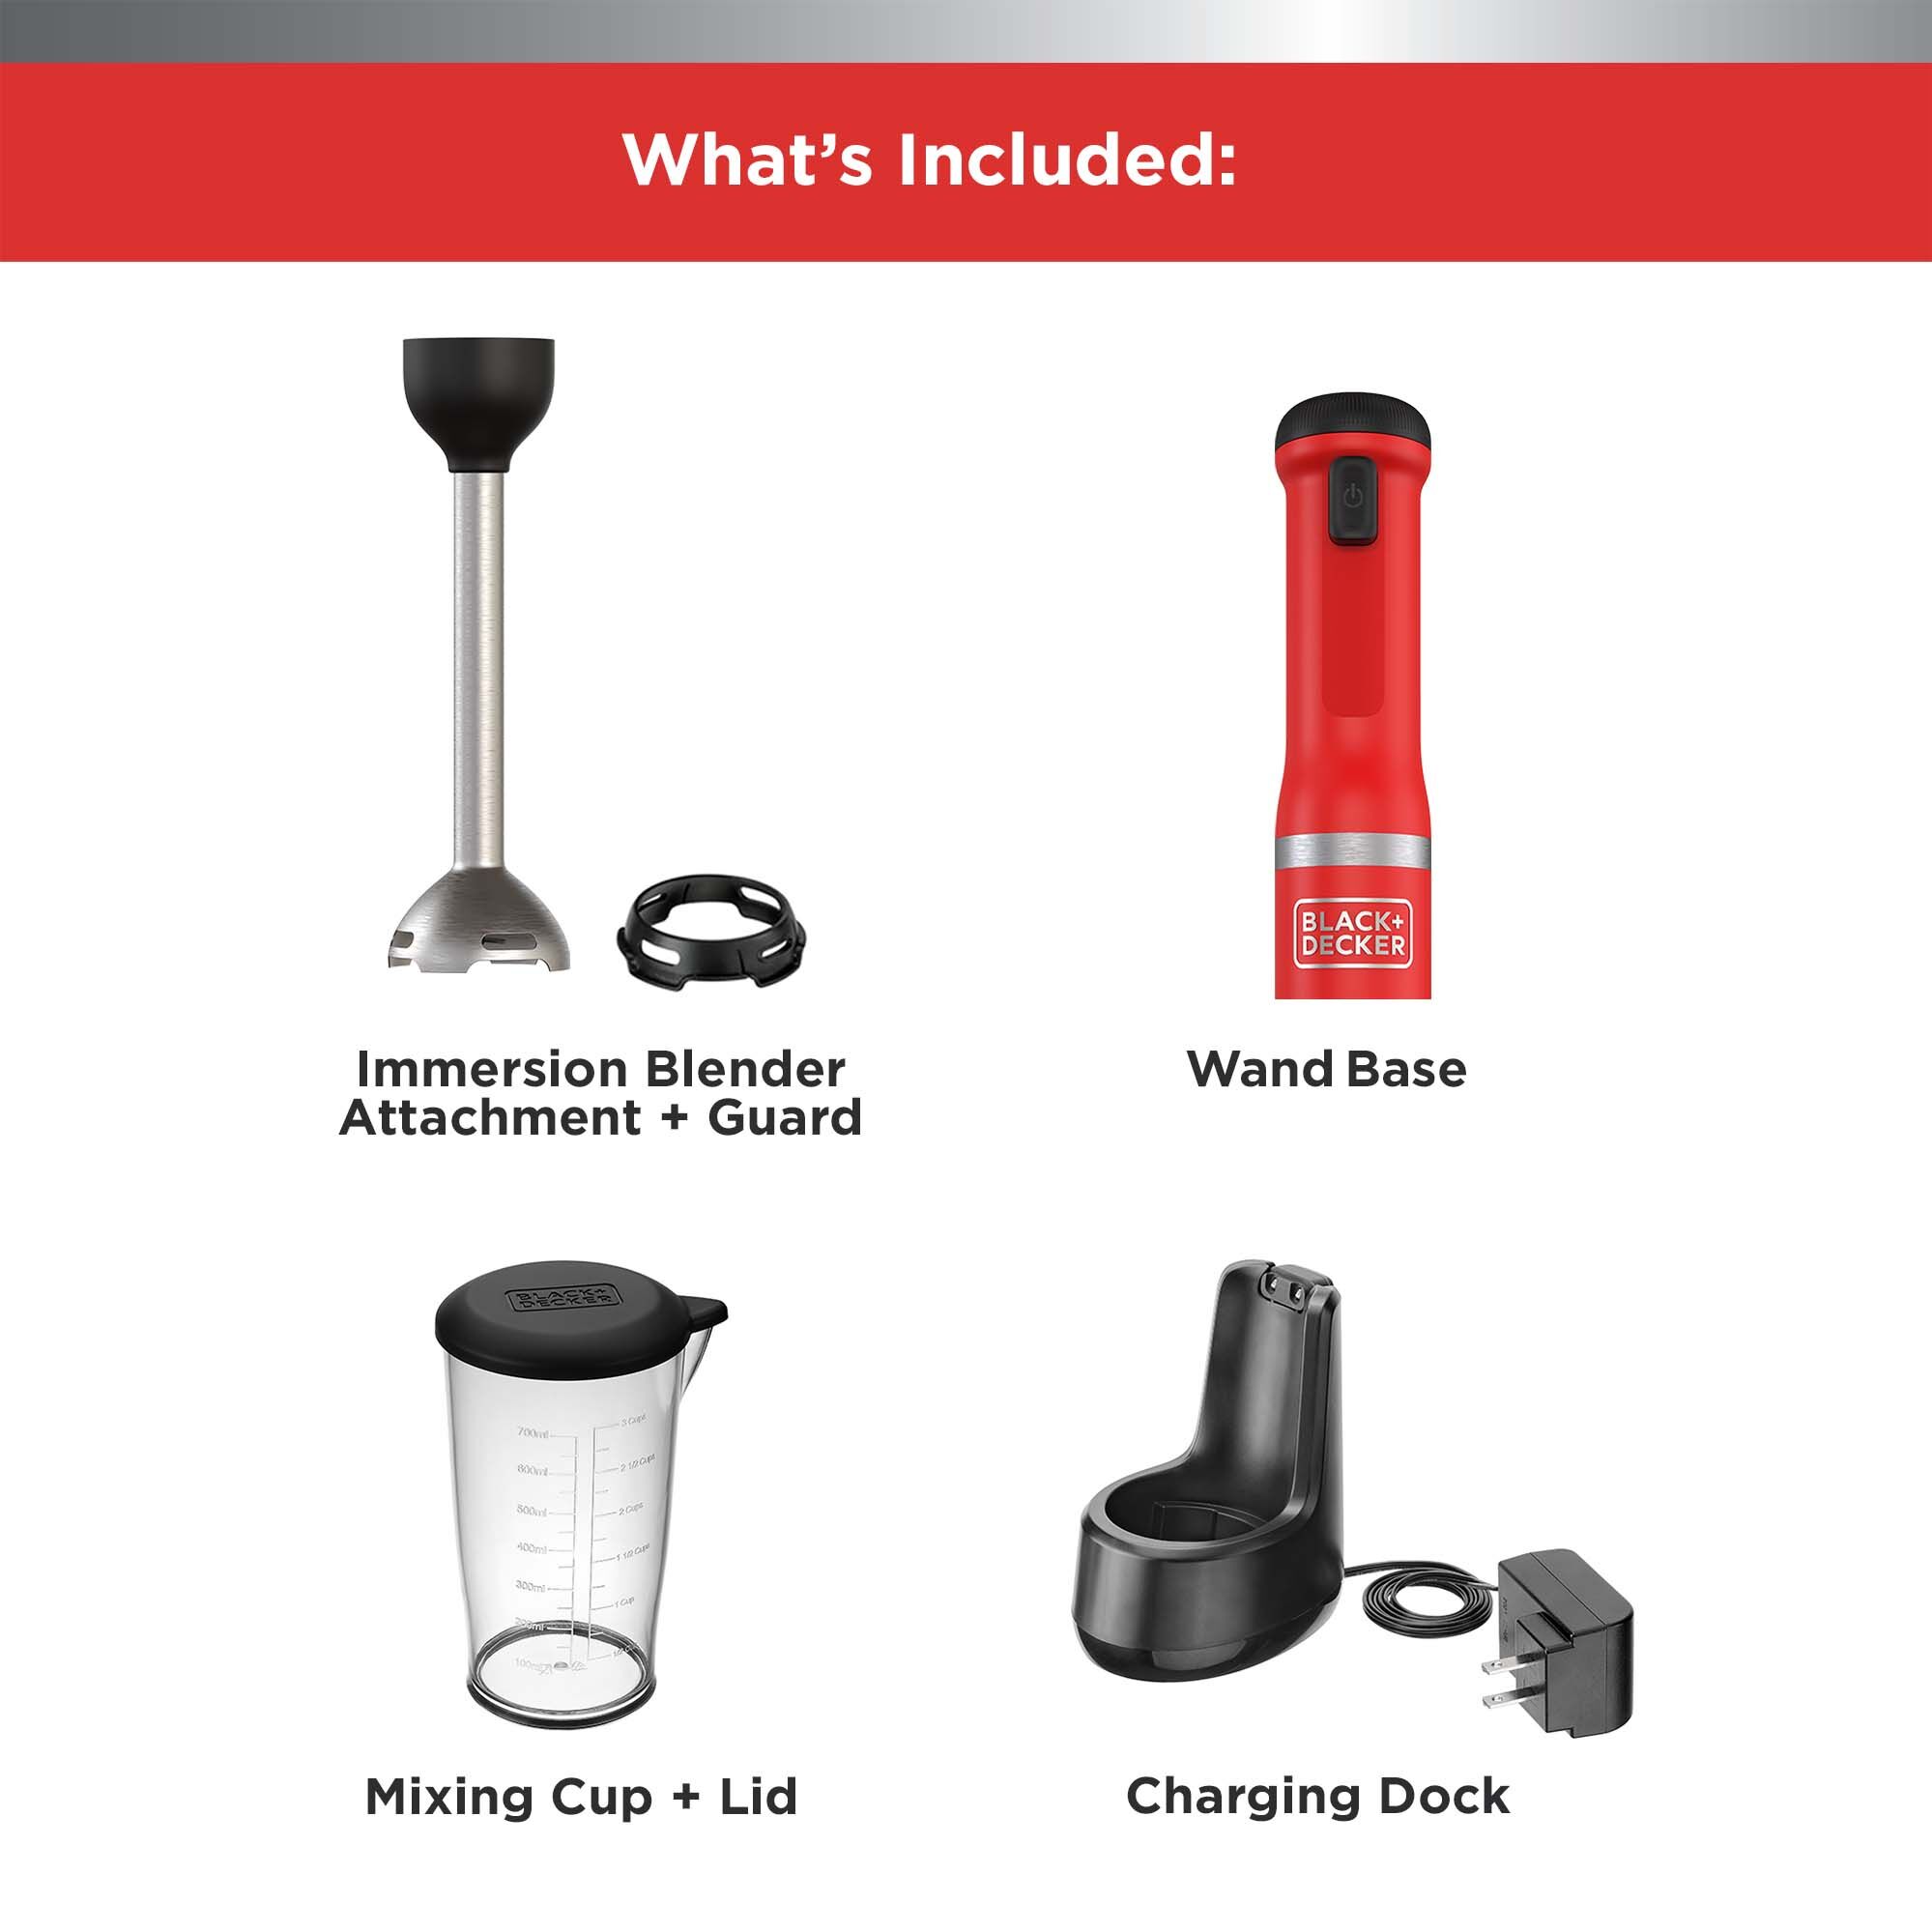 Components included in the BLACK+DECKER kitchen wand Red Immersion Blender Kit